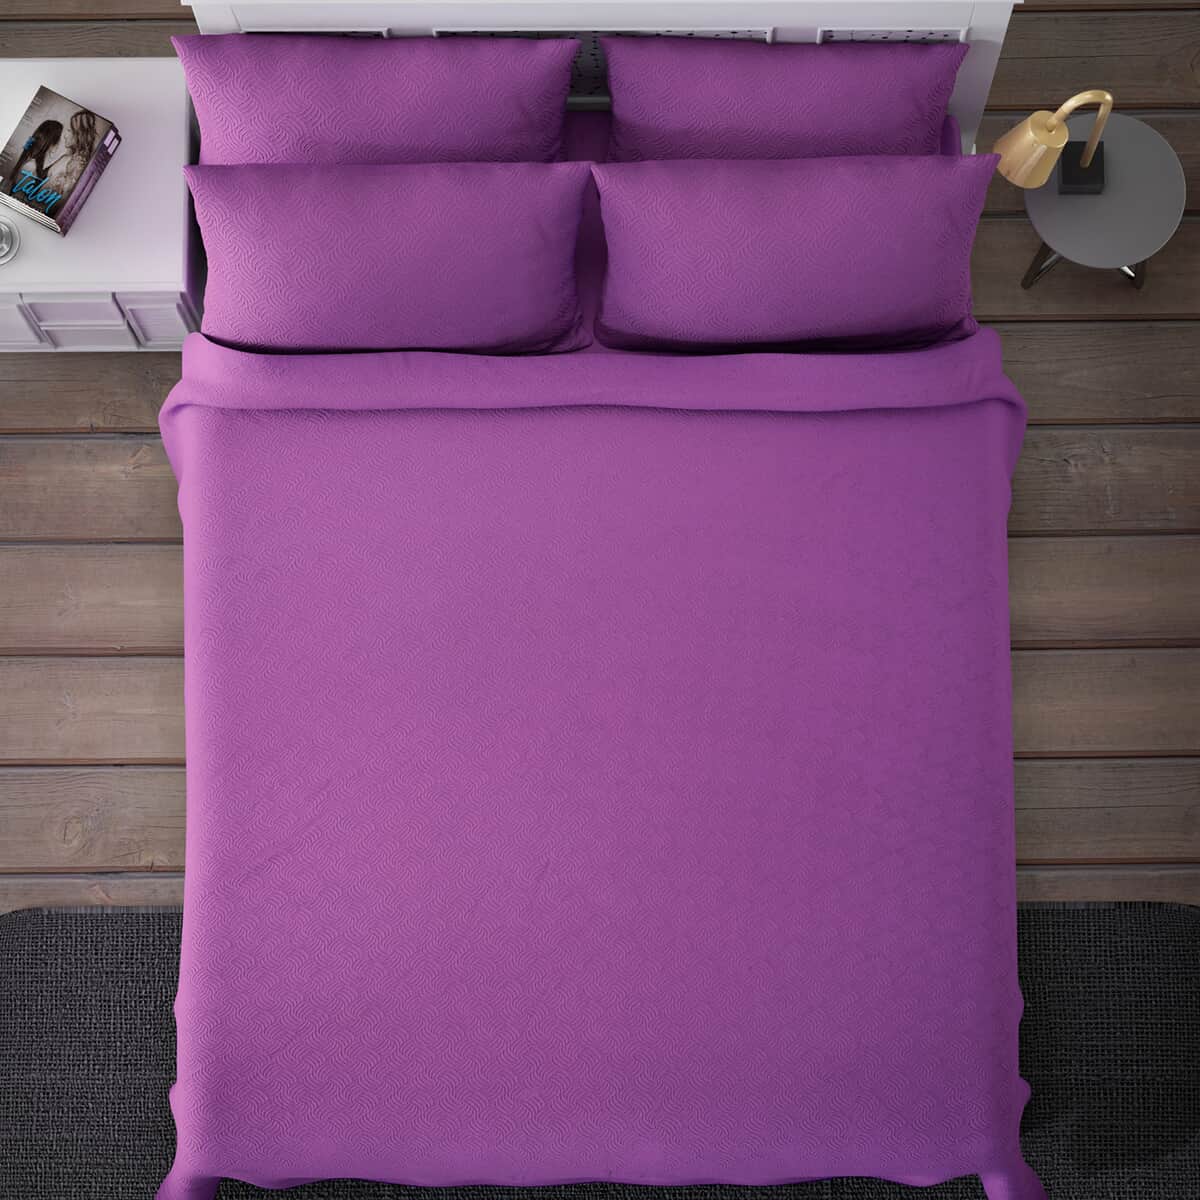 Homesmart Purple Solid Embossed 6 pcs Microfiber Sheet Set - King, Bed Sheets, Fitted Sheet, Bed Sheet Set, Microfiber Sheets image number 3